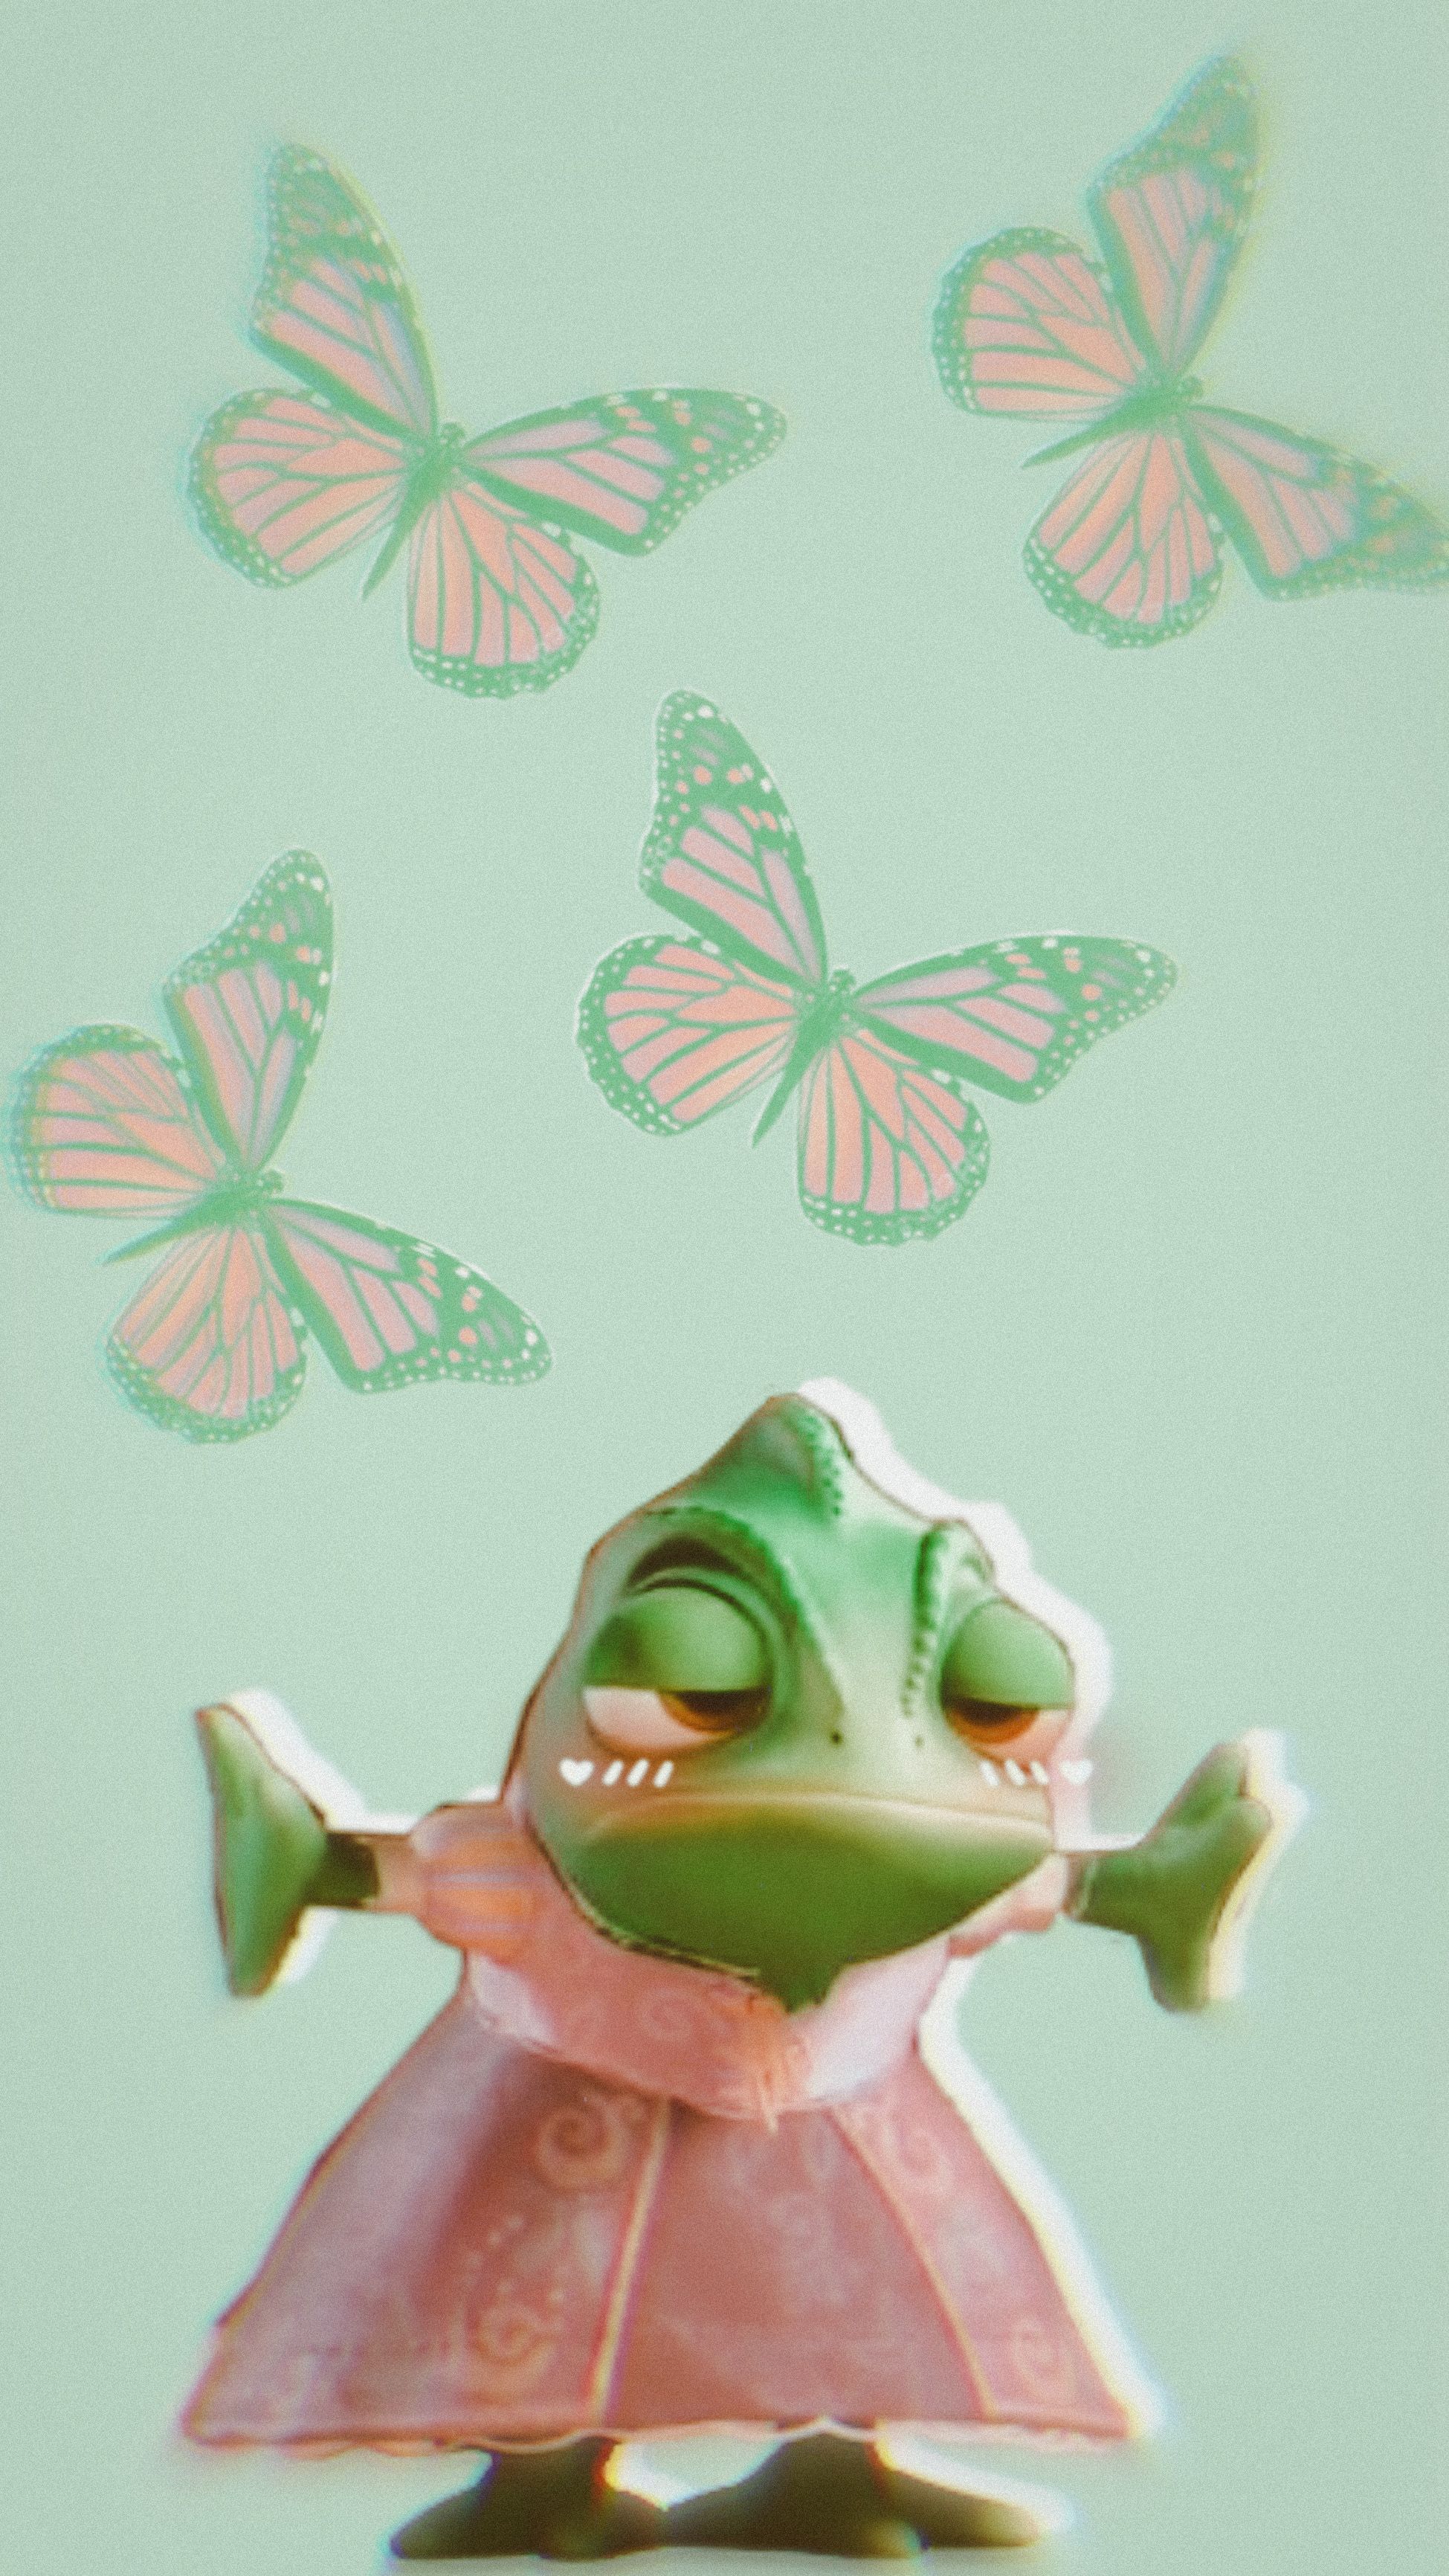 Pascal from Tangled with butterflies - Rapunzel